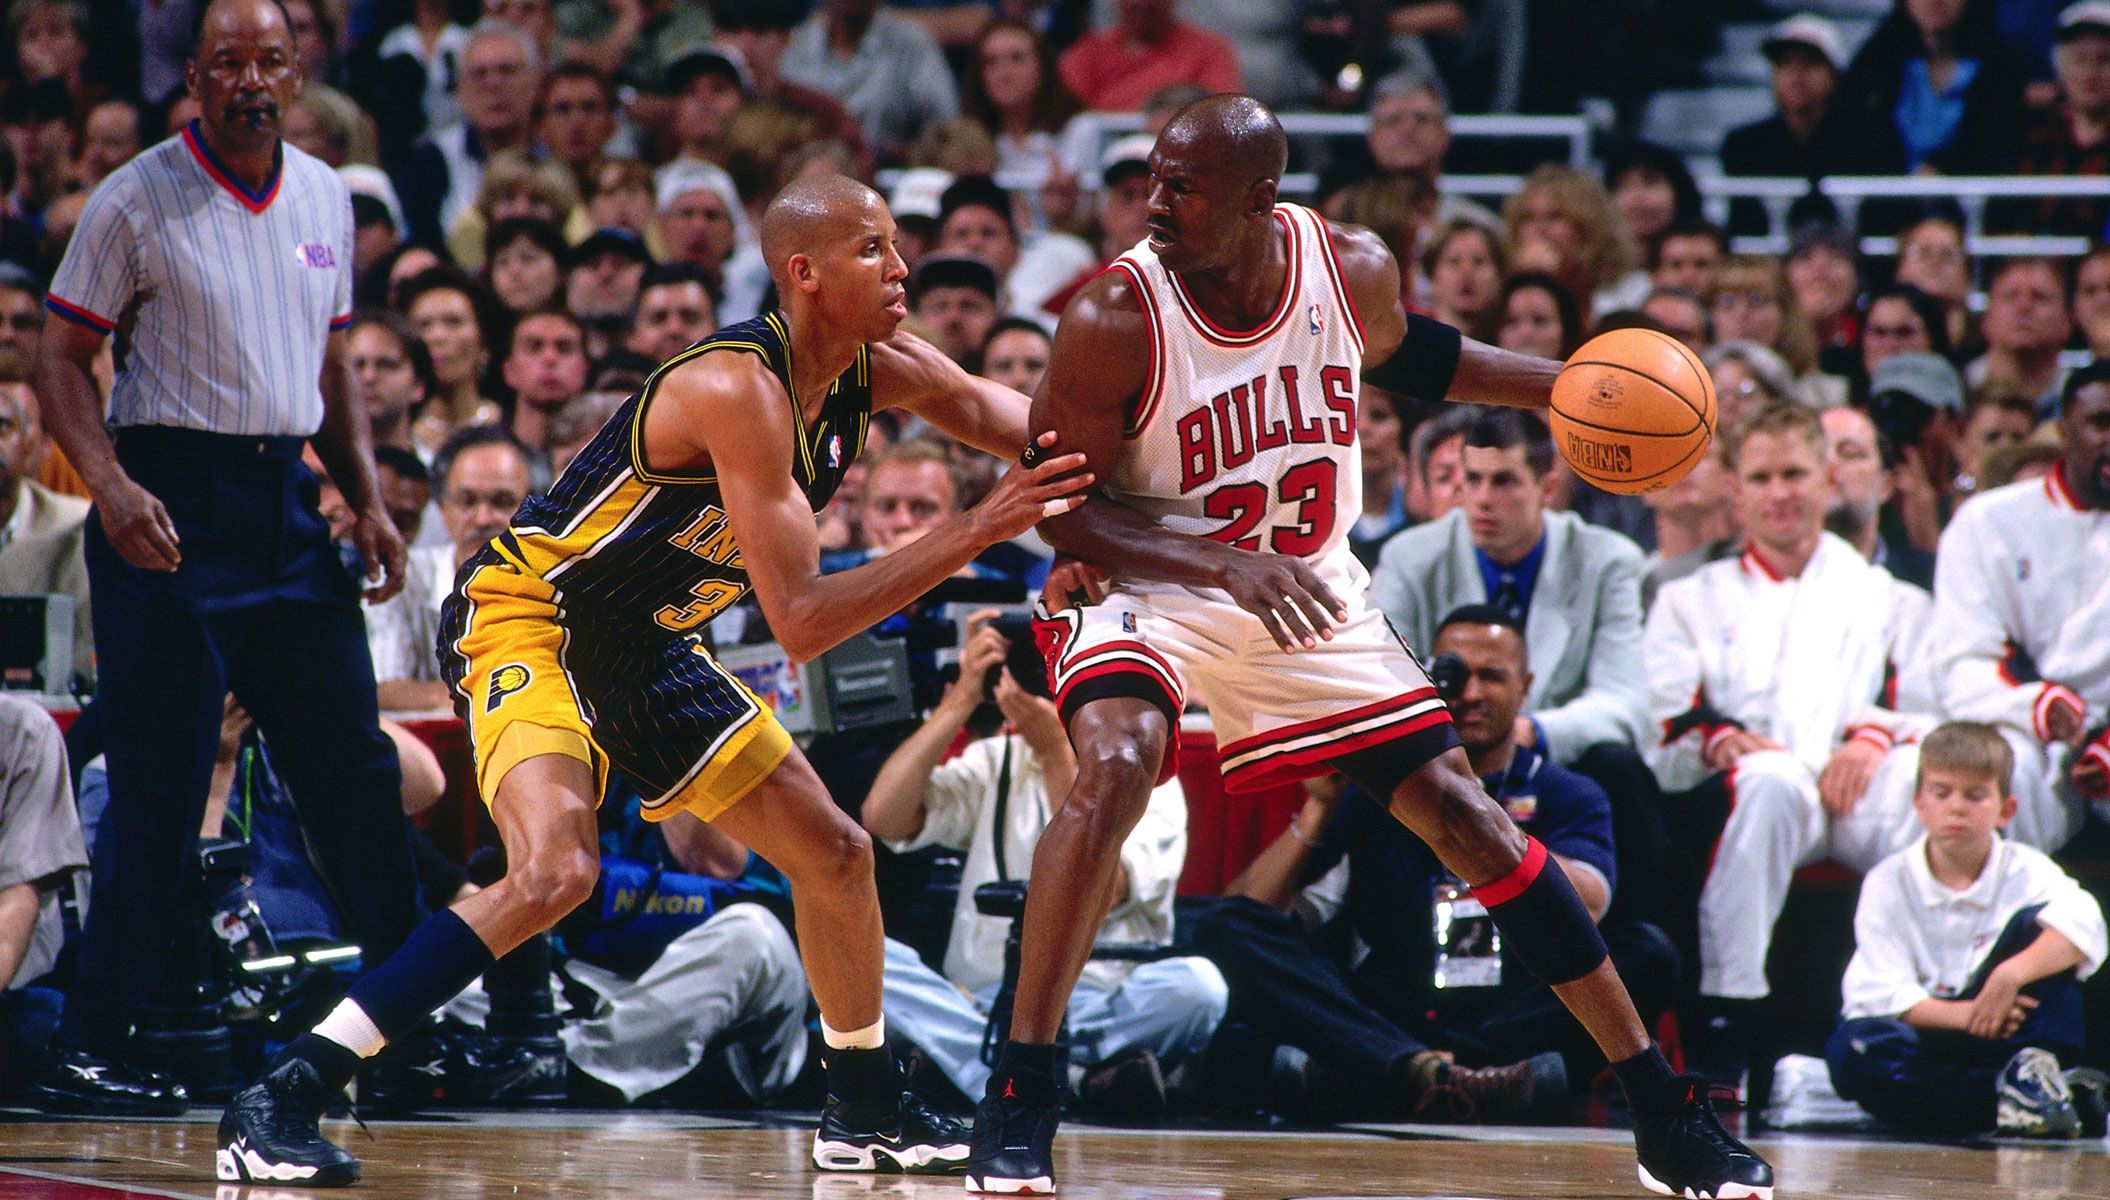 Lang’s World: Michael Jordan is the Greatest There Ever Was Or Ever Will Be